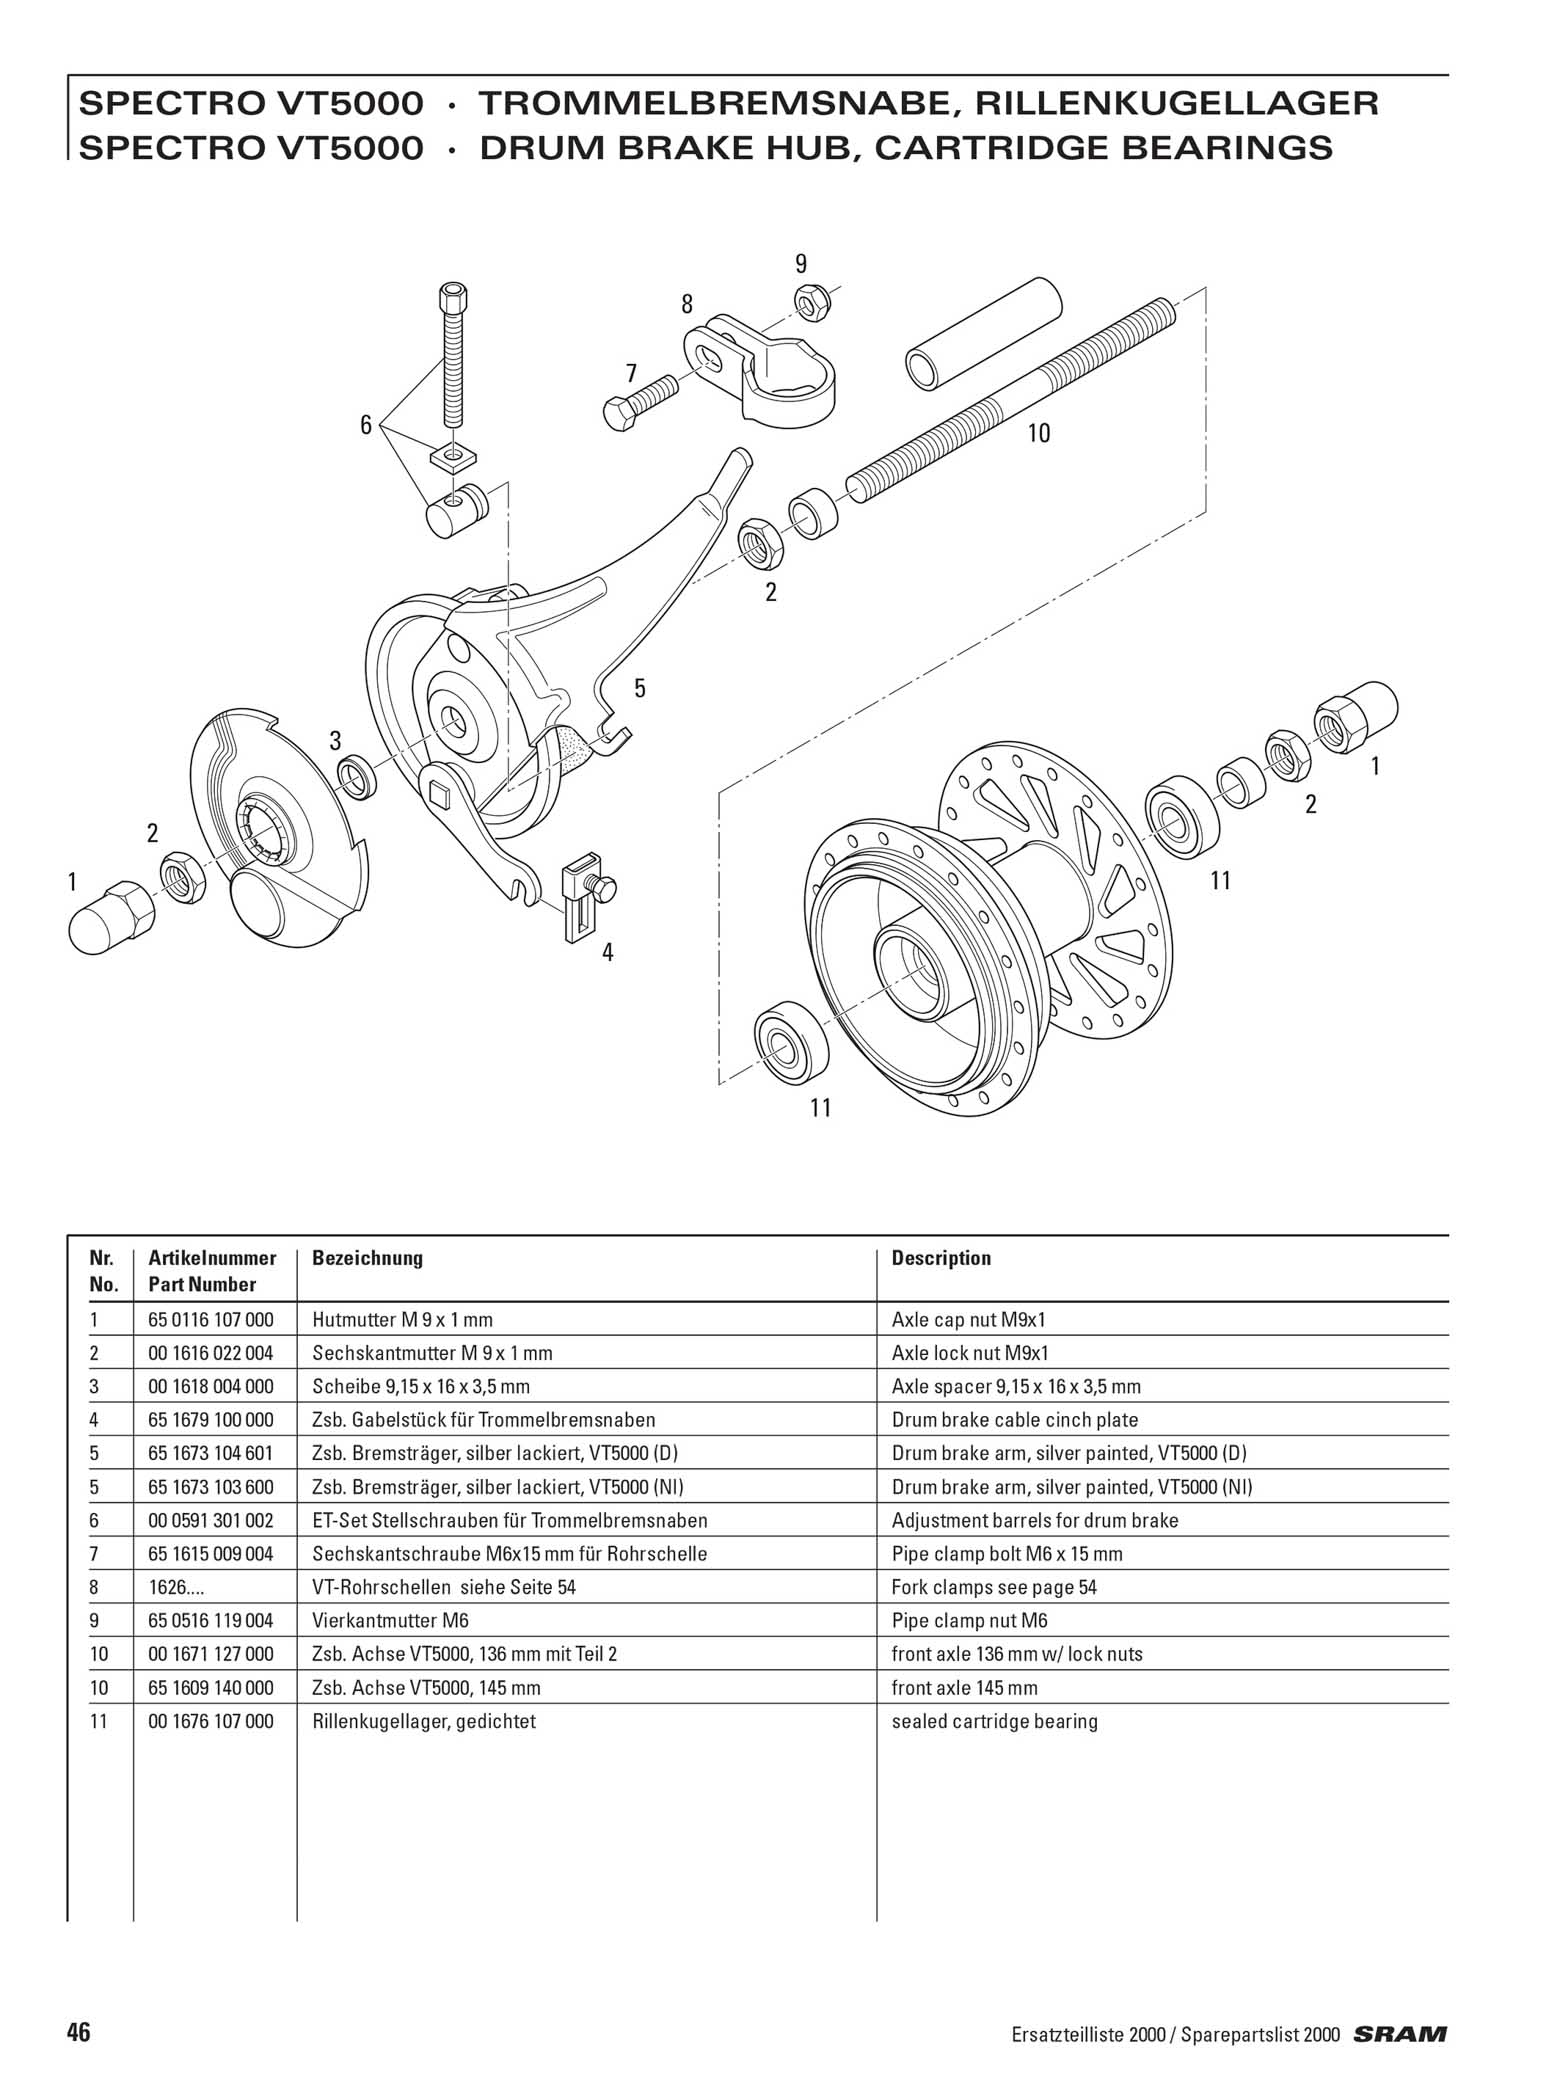 SRAM - Spare Parts List 2000 page 046 main image